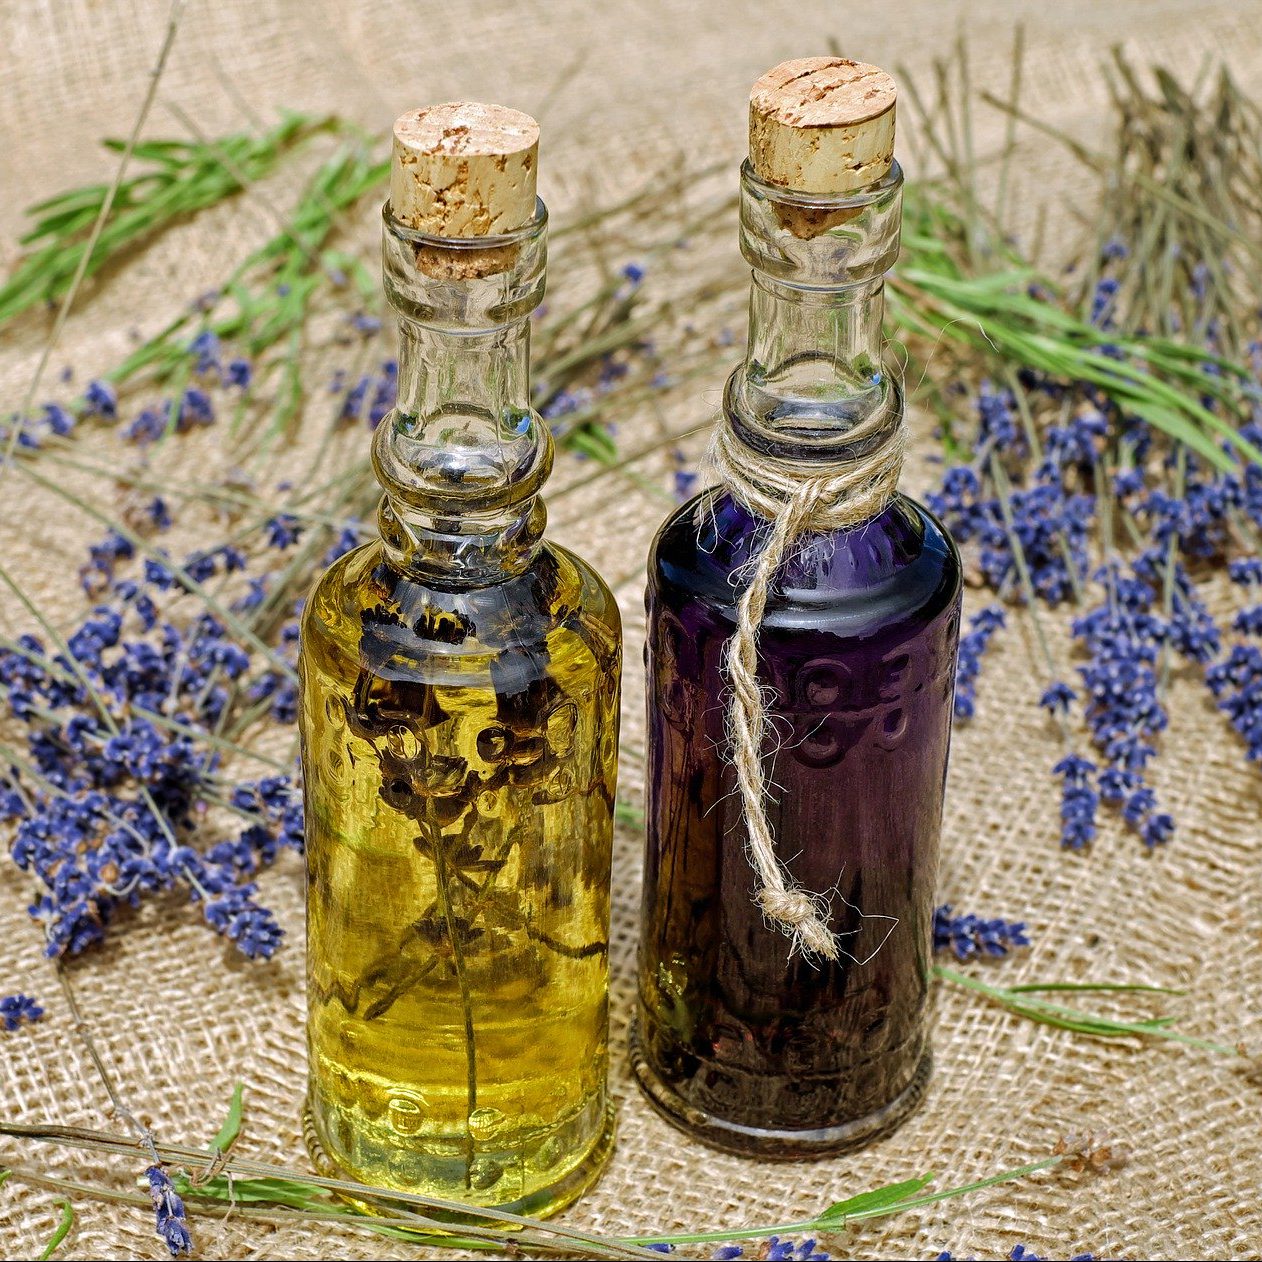 Essential Acupuncture Oil and Herbs